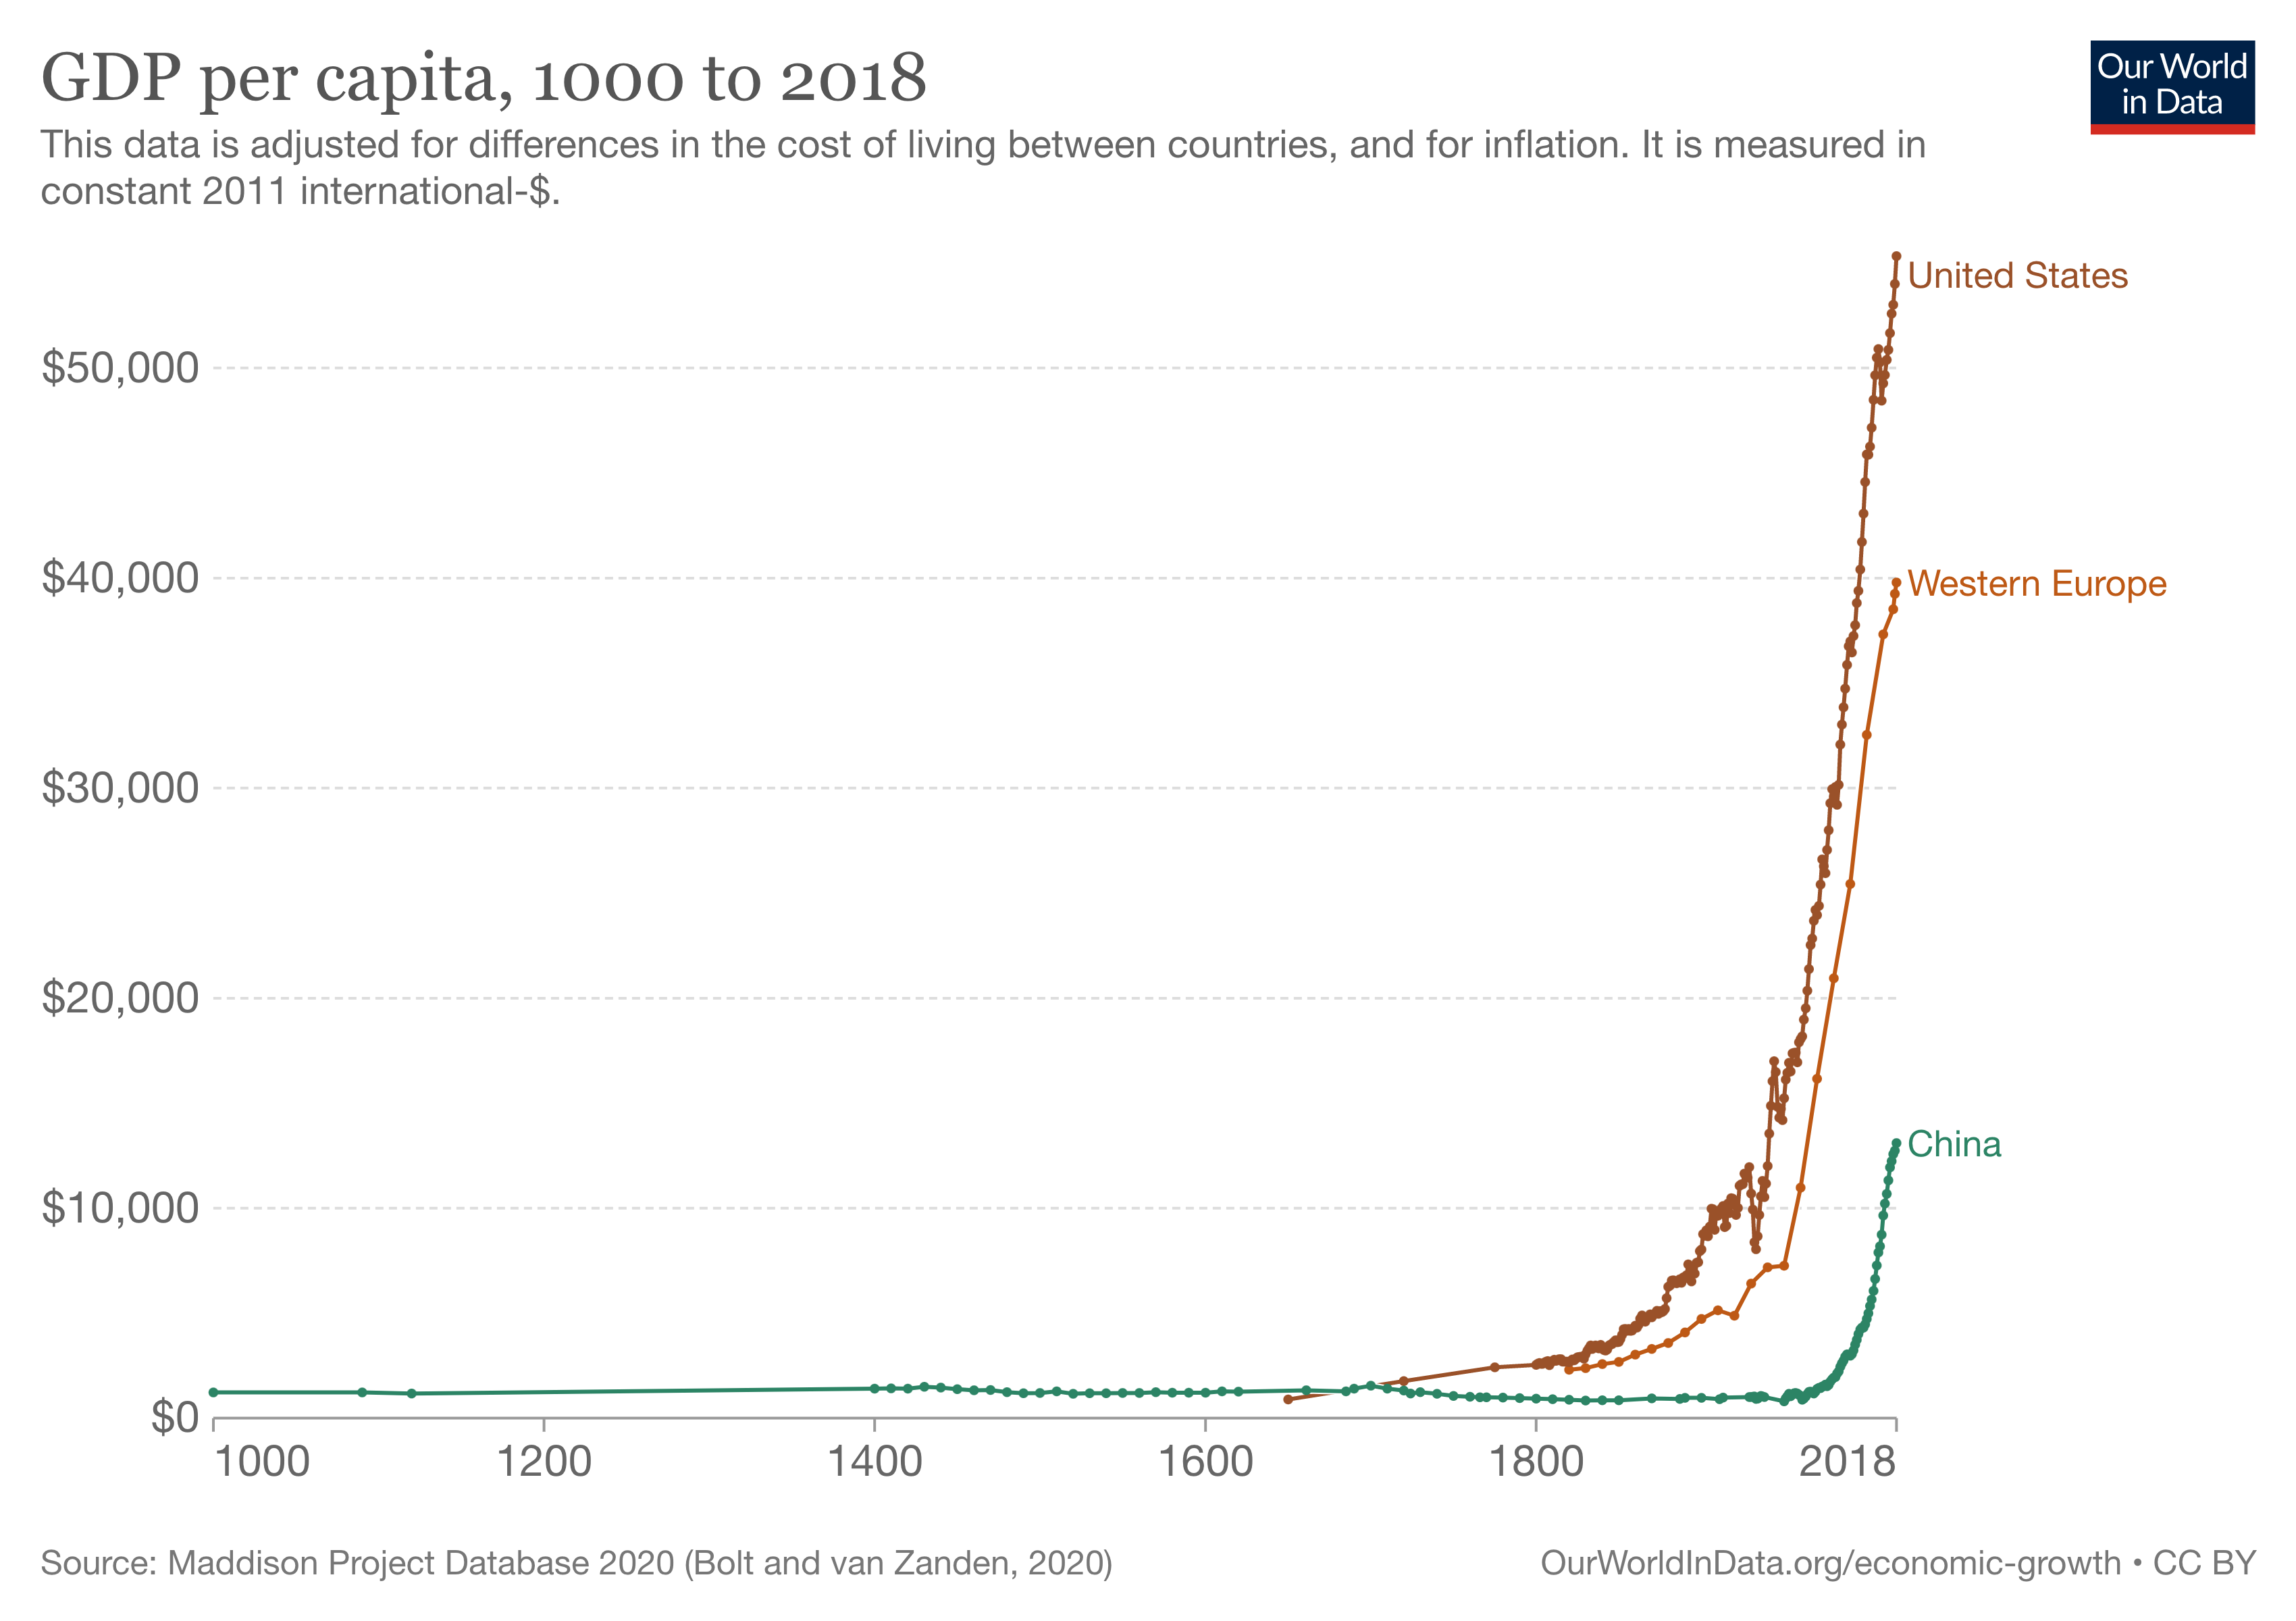 GDP per capita, 1000 to 2018. Shows massive increases for the United States and Western Europe, with China only beginning to increase in the latter half of the 20th century.